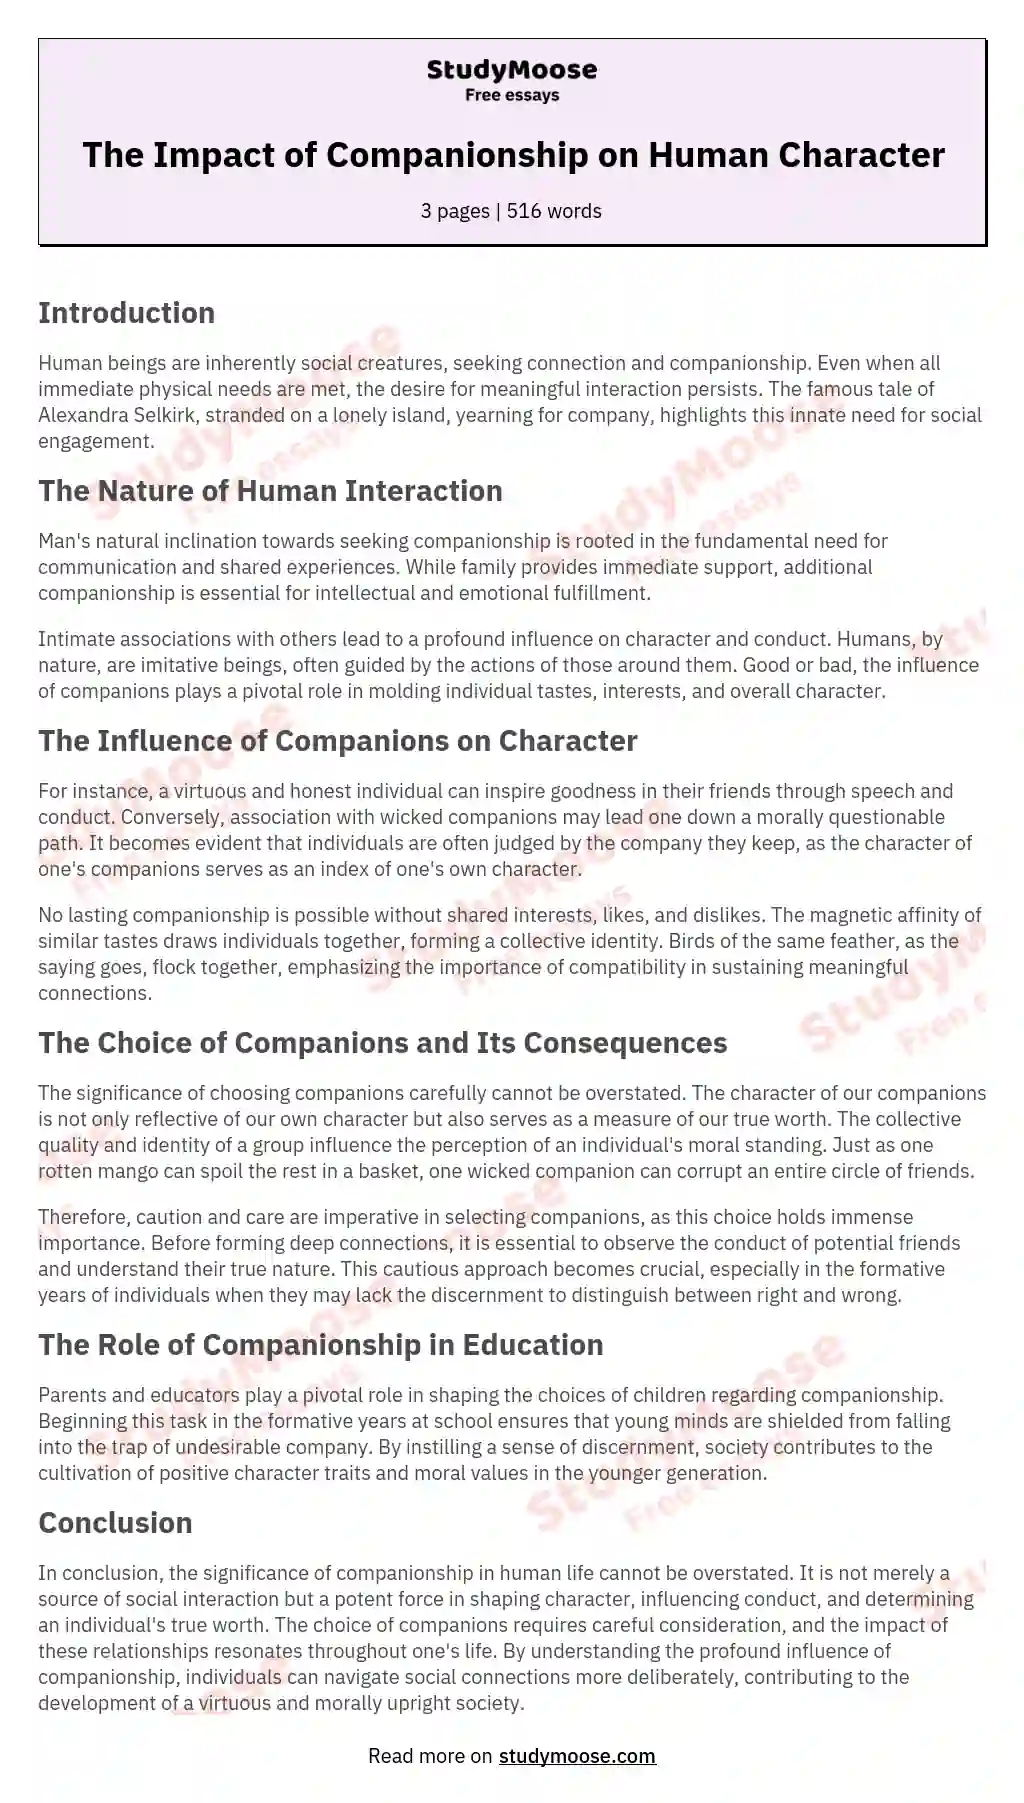 The Impact of Companionship on Human Character essay